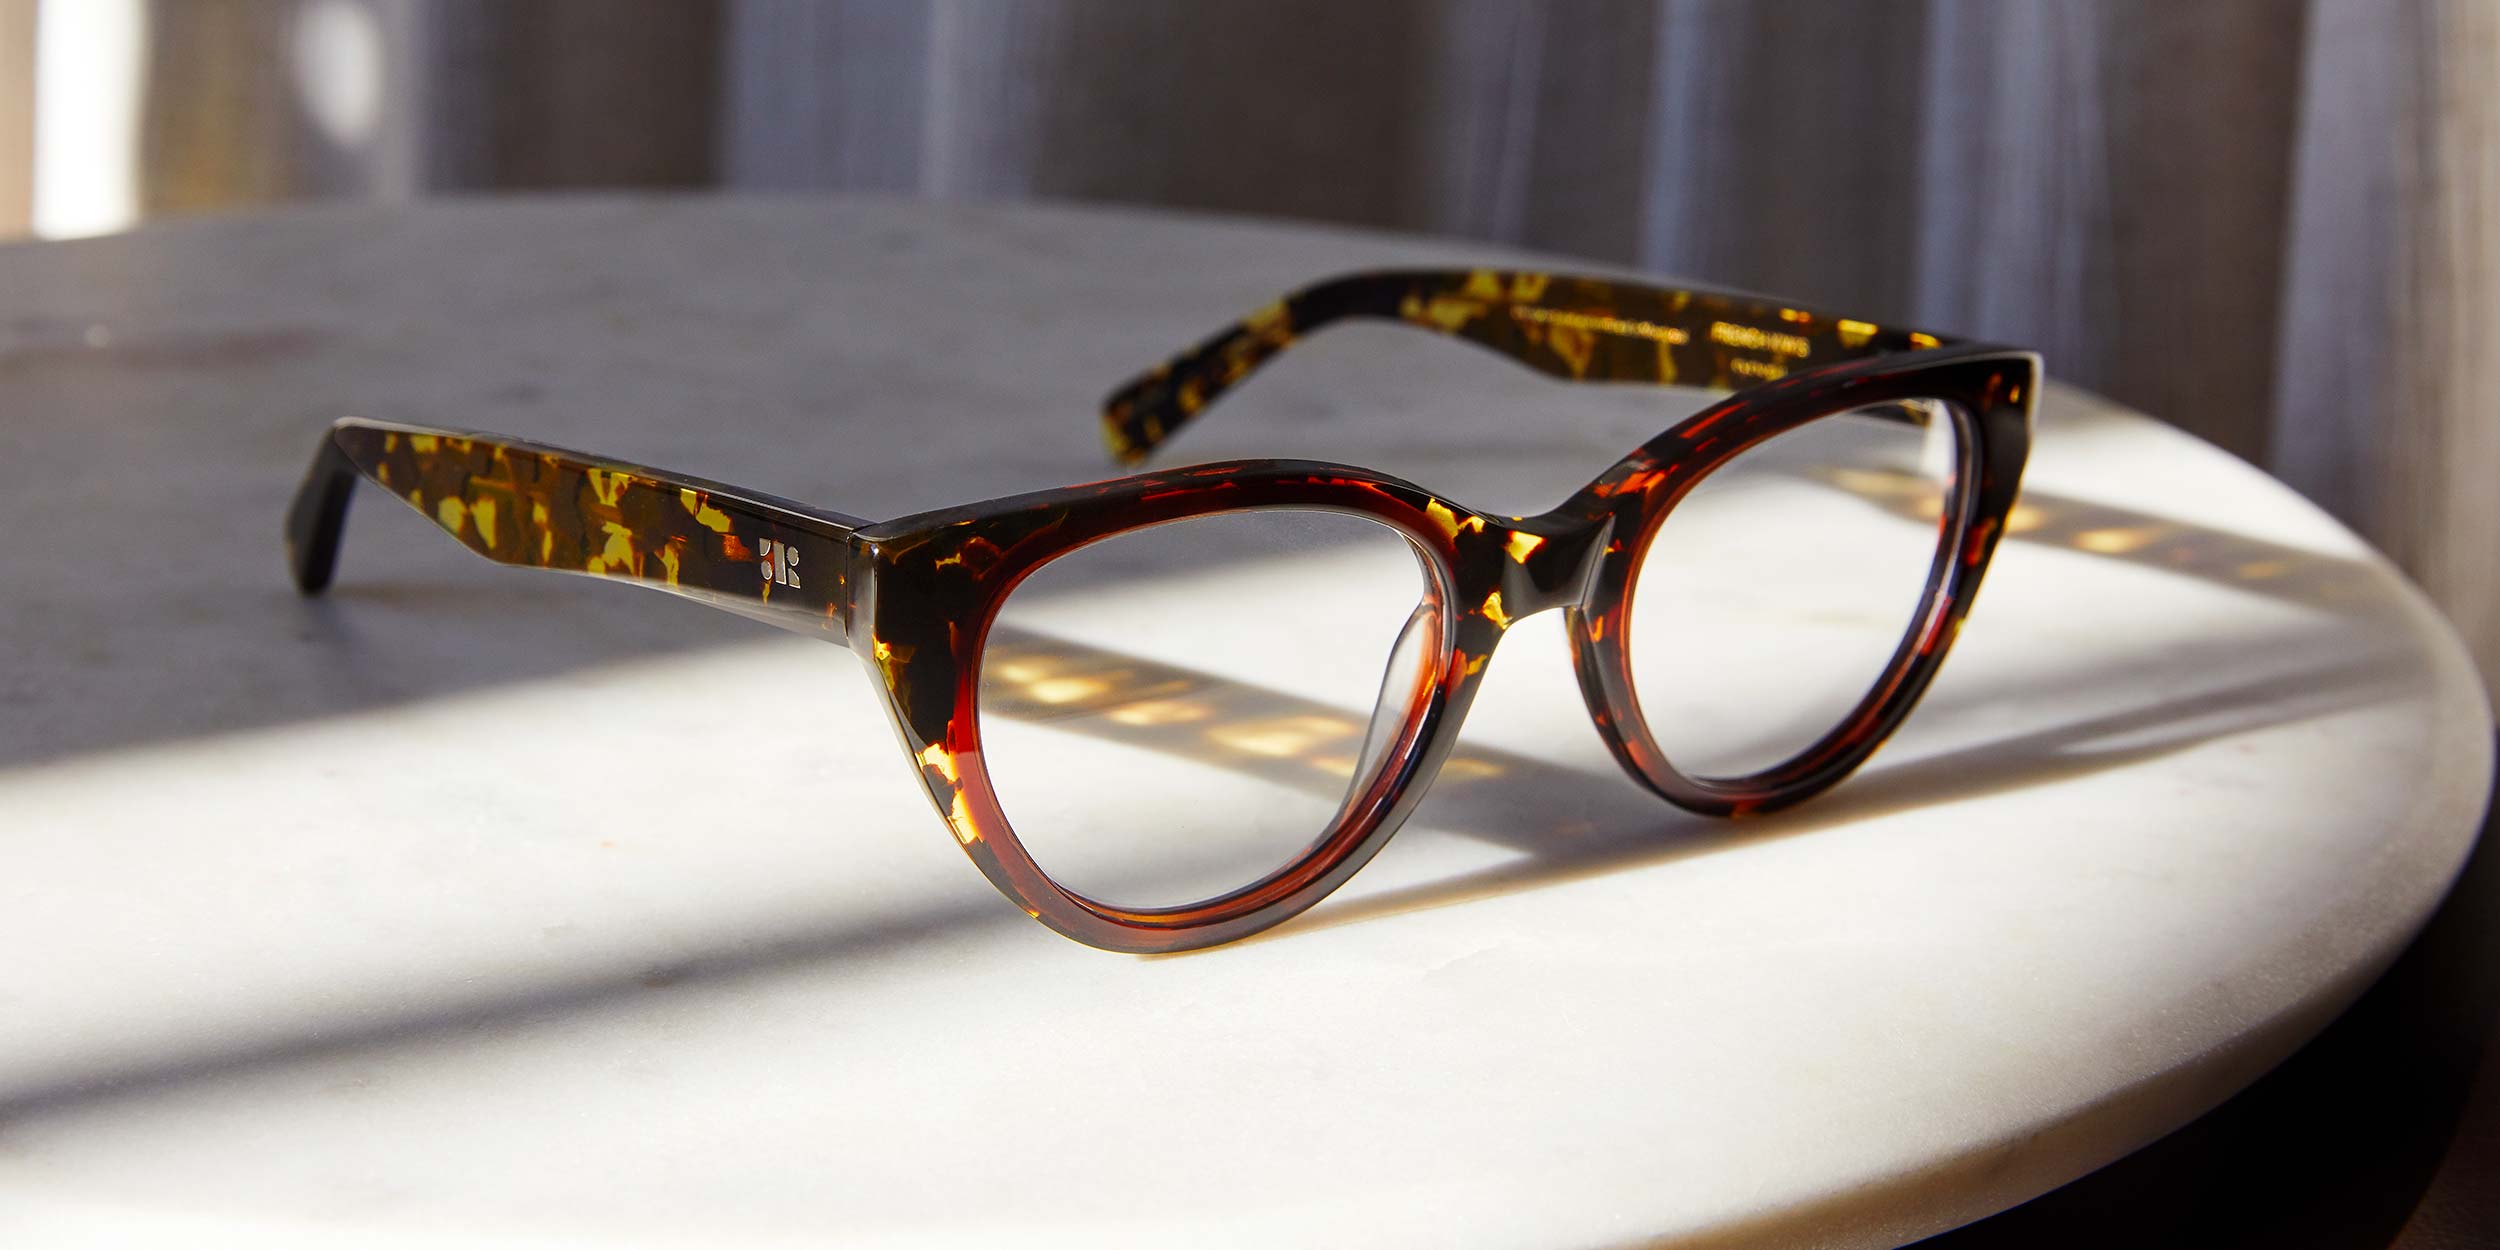 Photo Details of Colette Black Marble Reading Glasses in a room